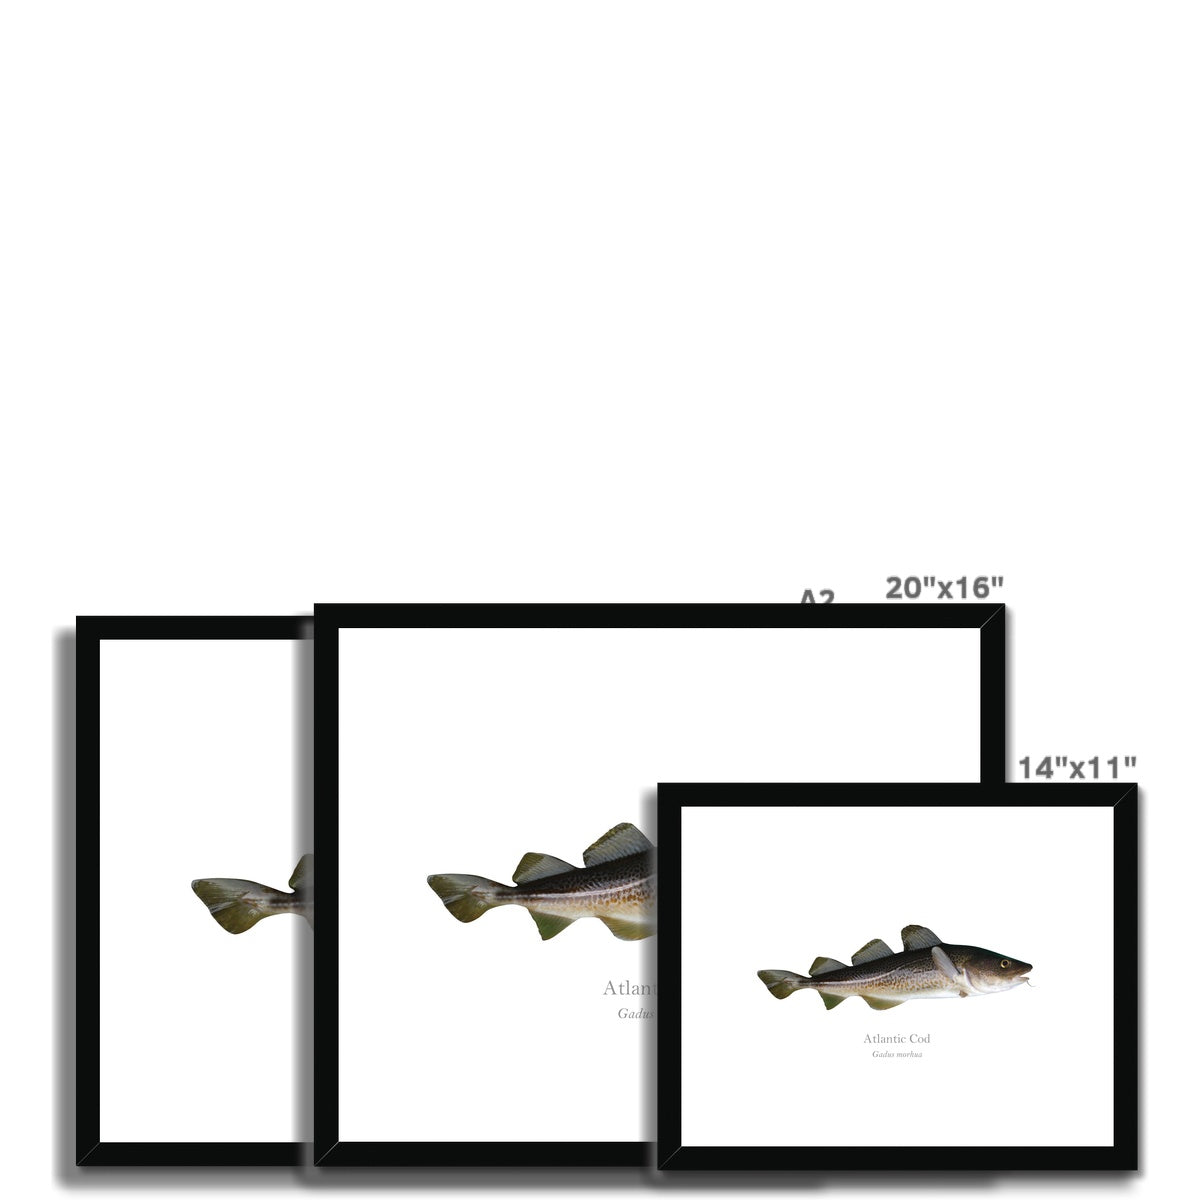 Atlantic Cod - Framed & Mounted Print - With Scientific Name